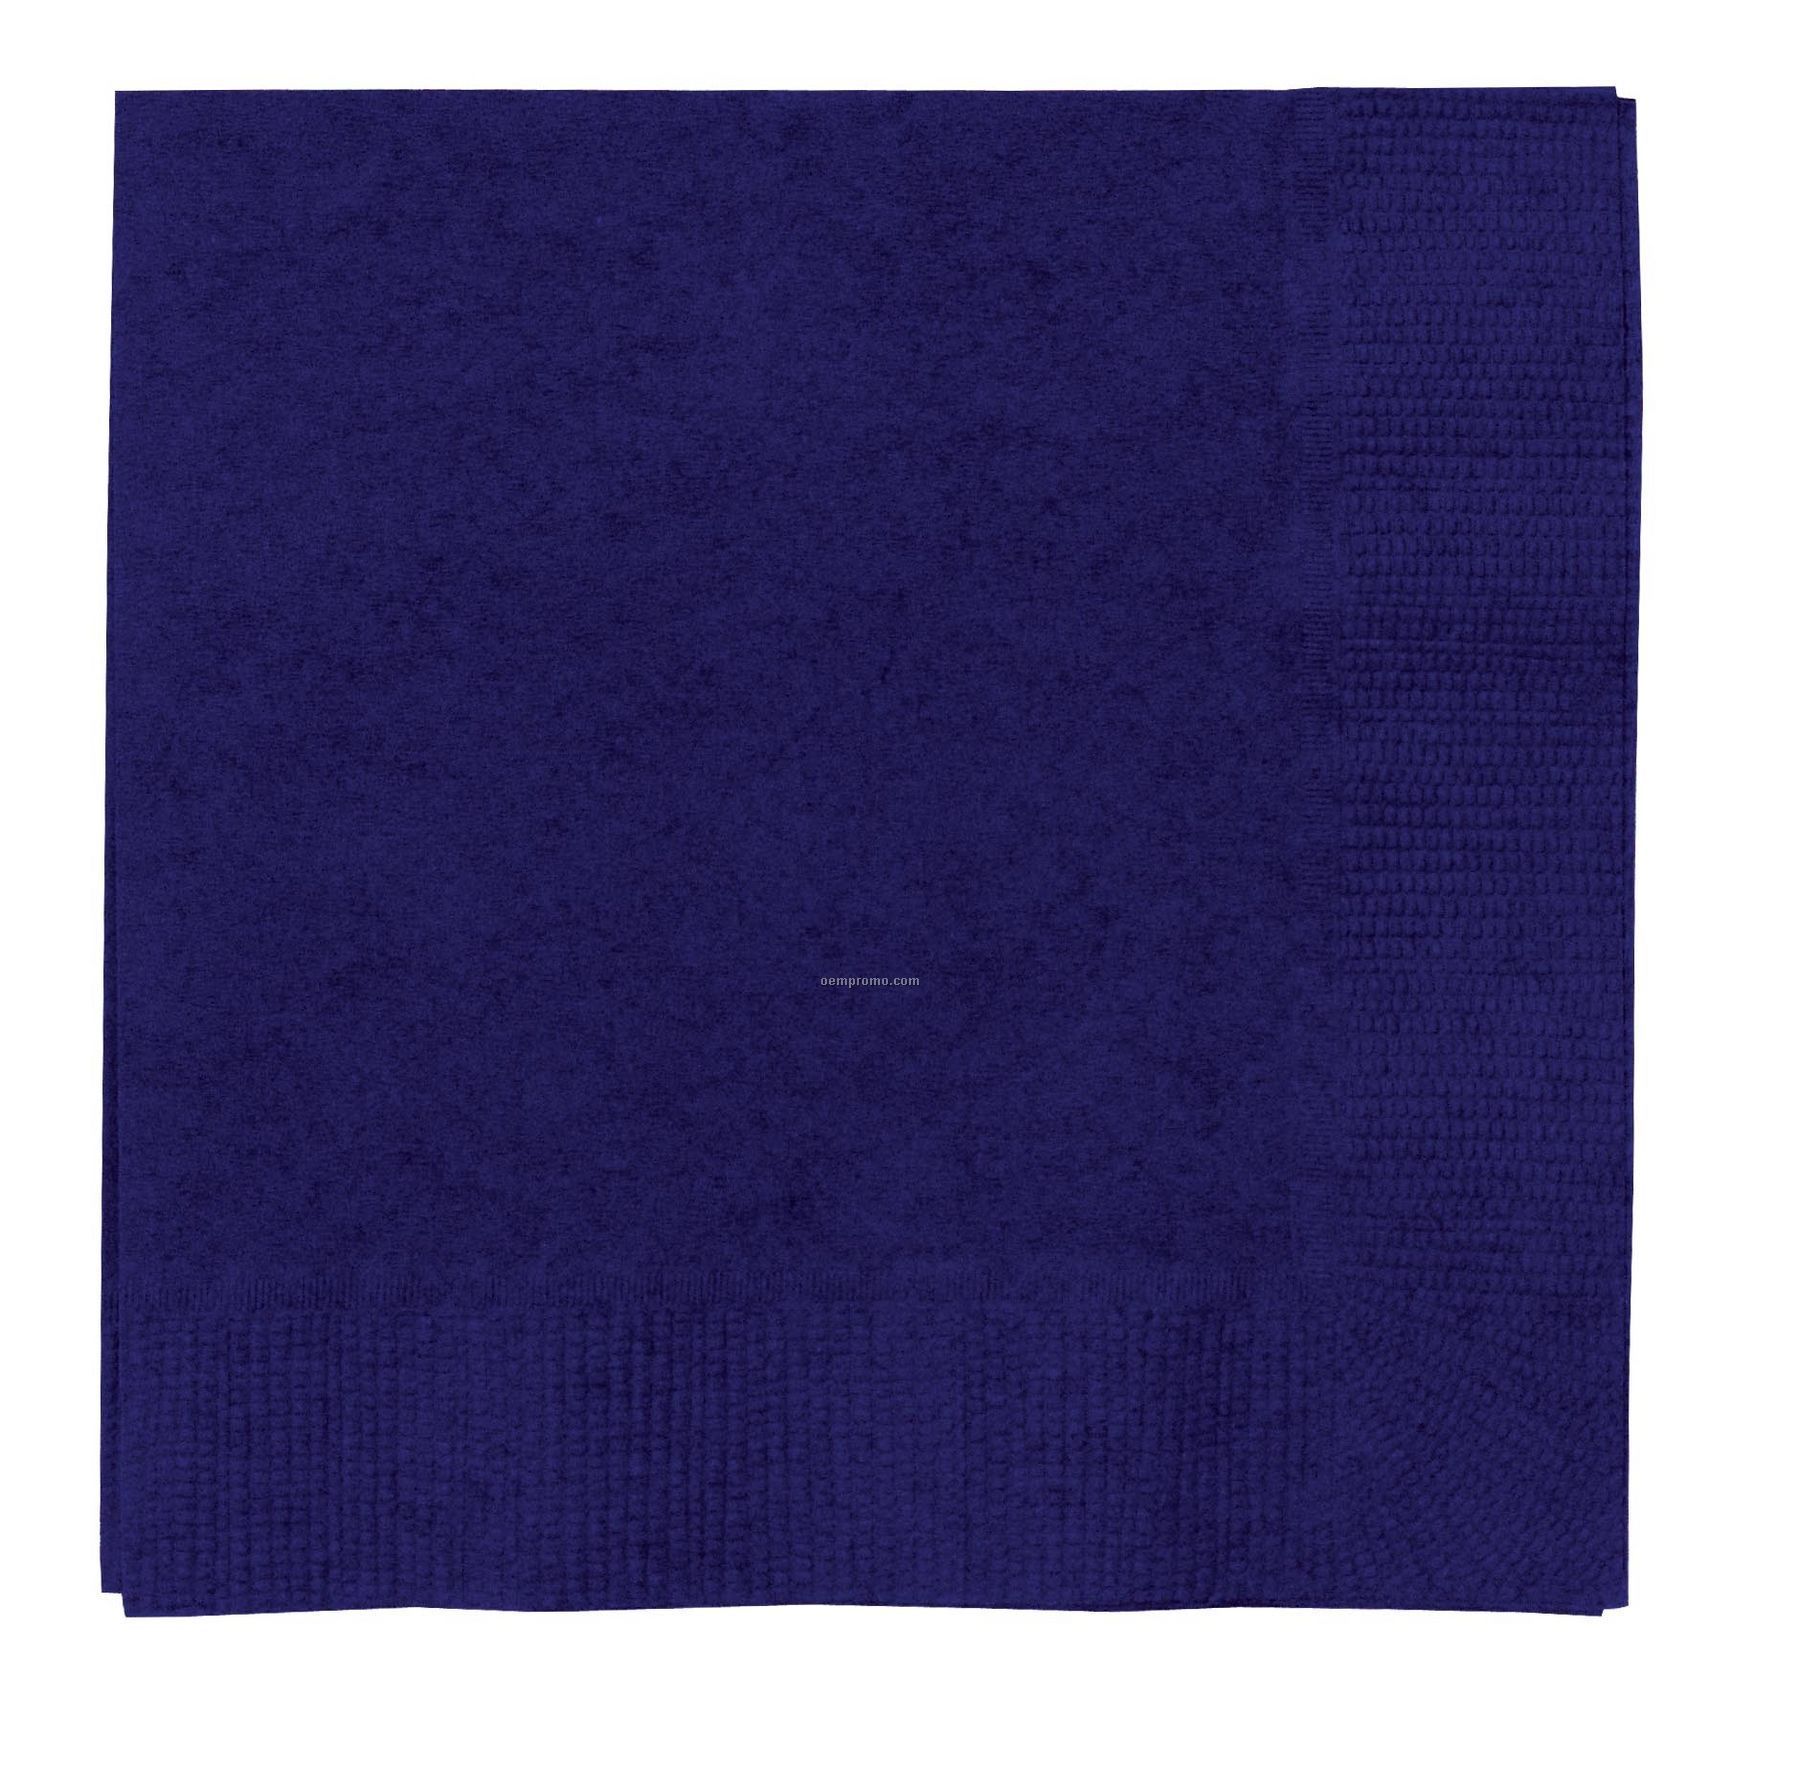 Colorware Navy Blue Dinner Napkins With 1/4 Fold